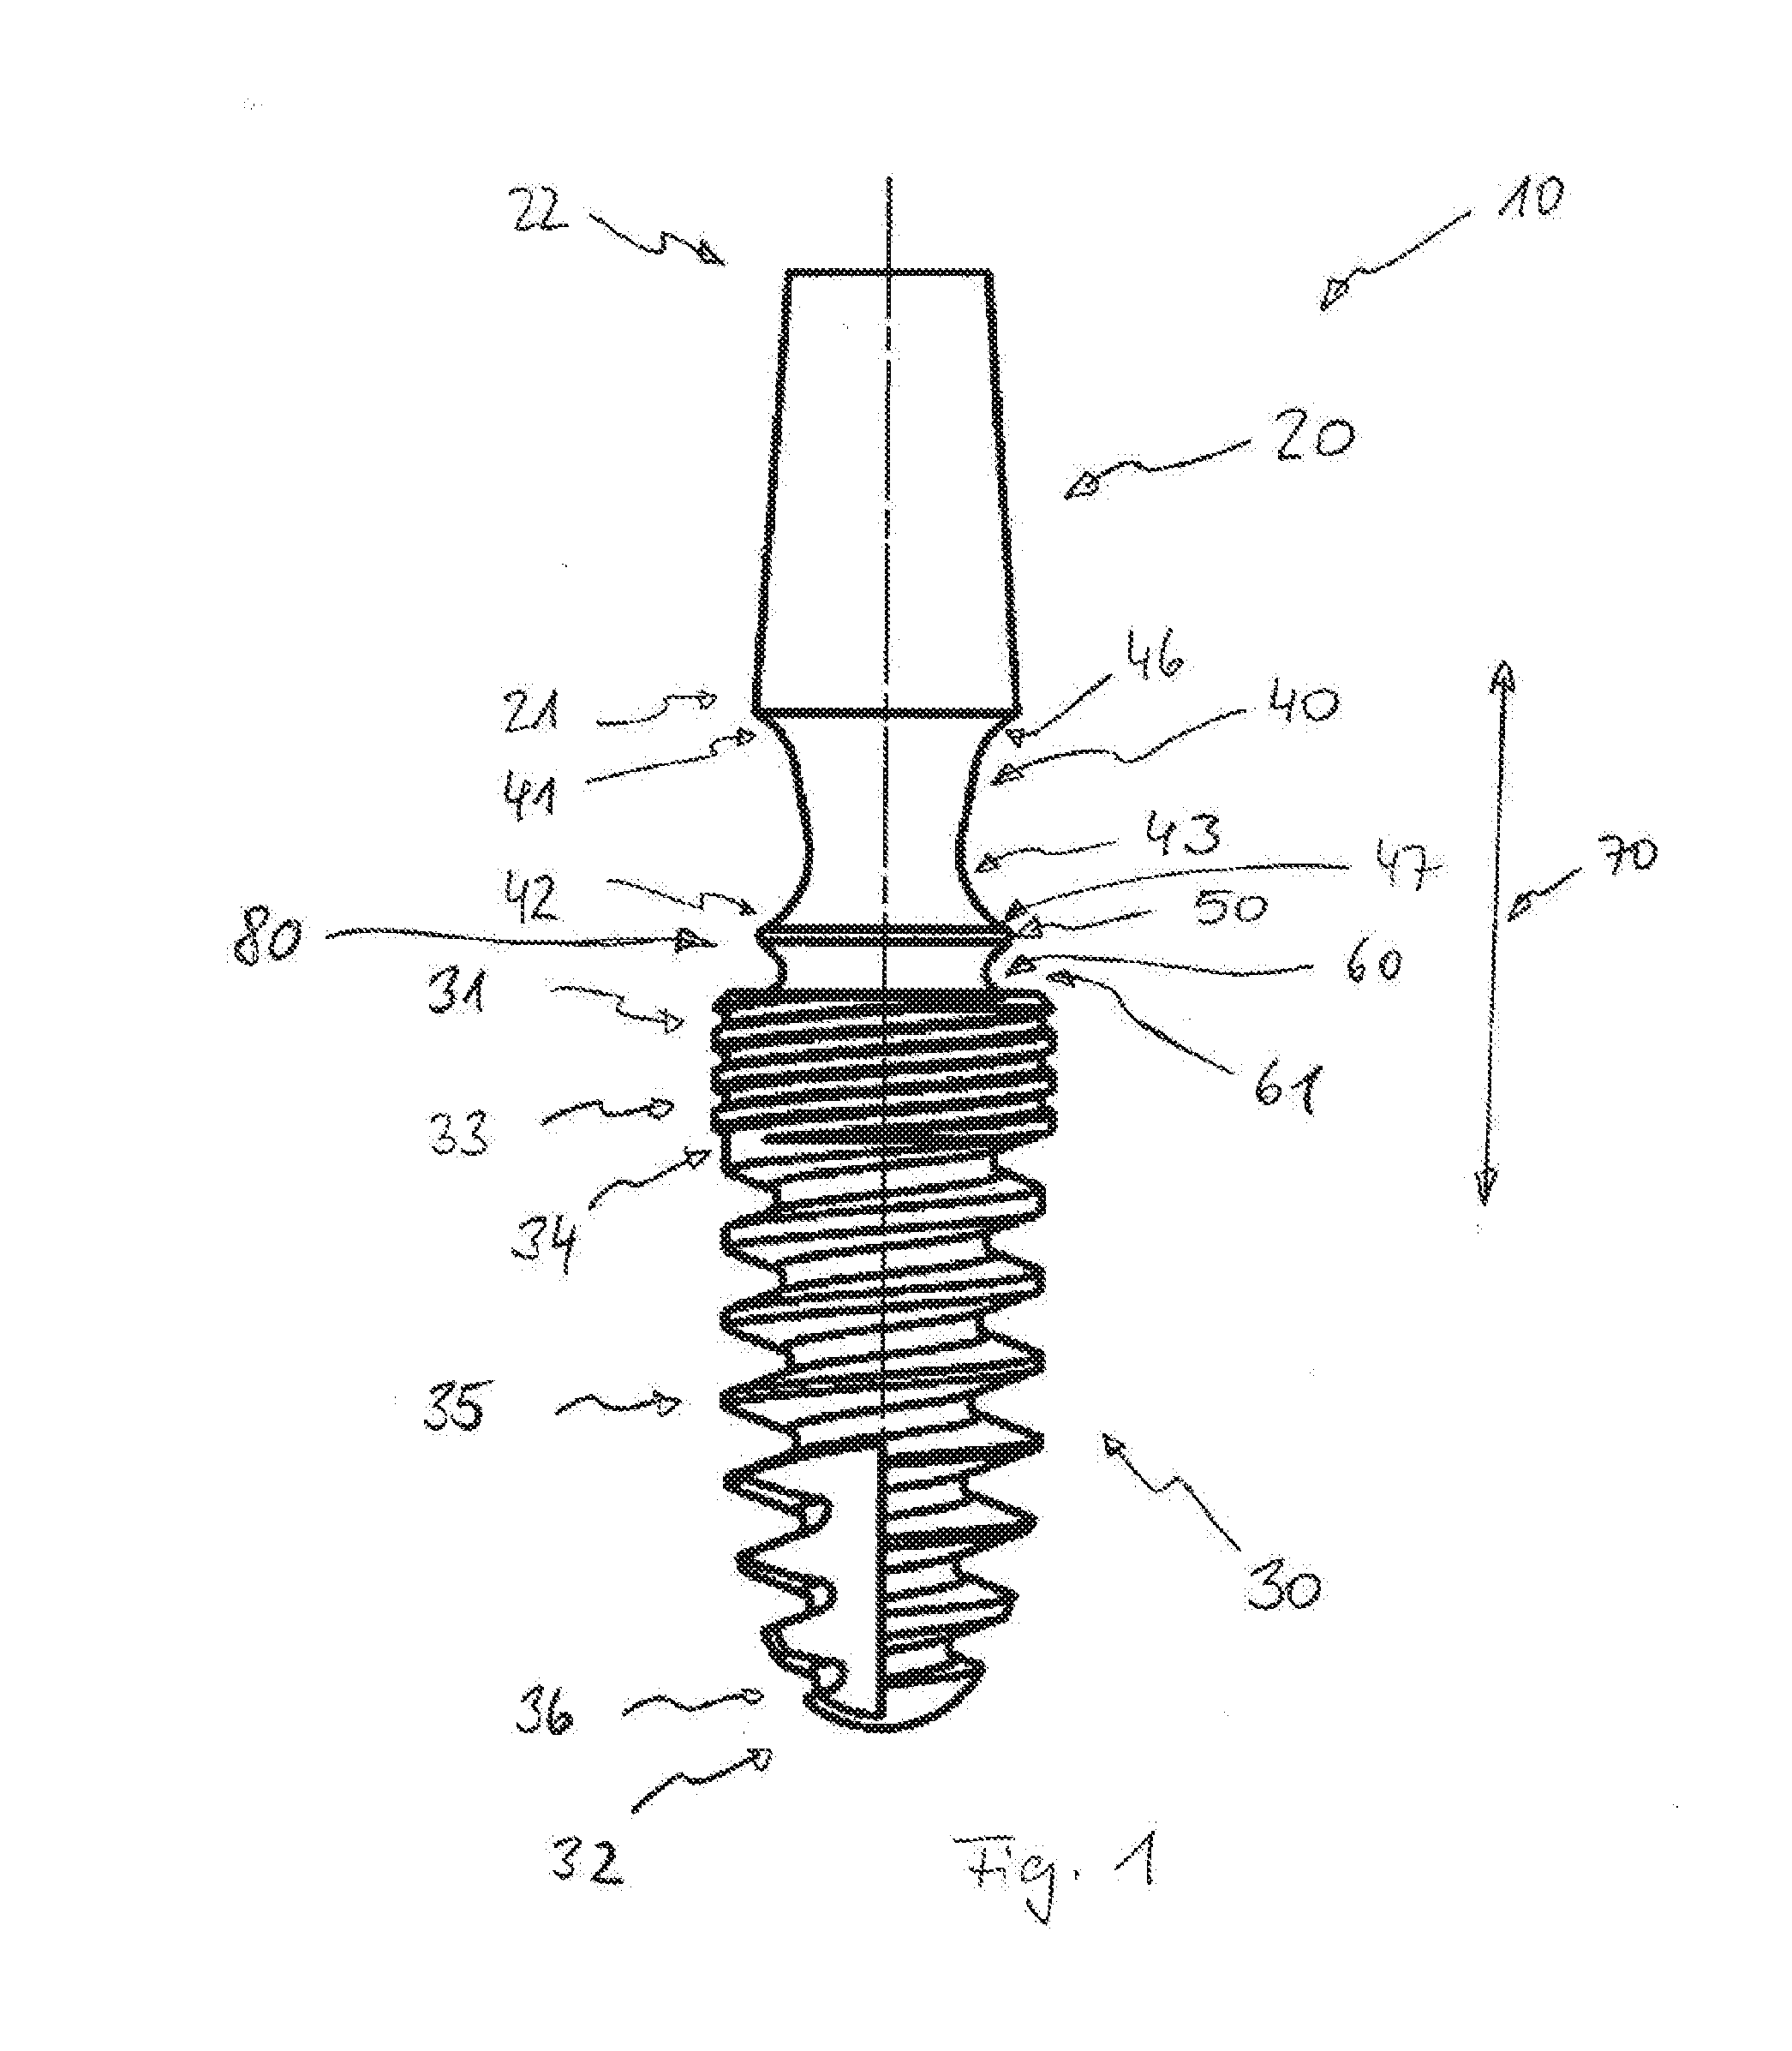 One-part tooth implant, device for bending an implant, and method for bending an implant